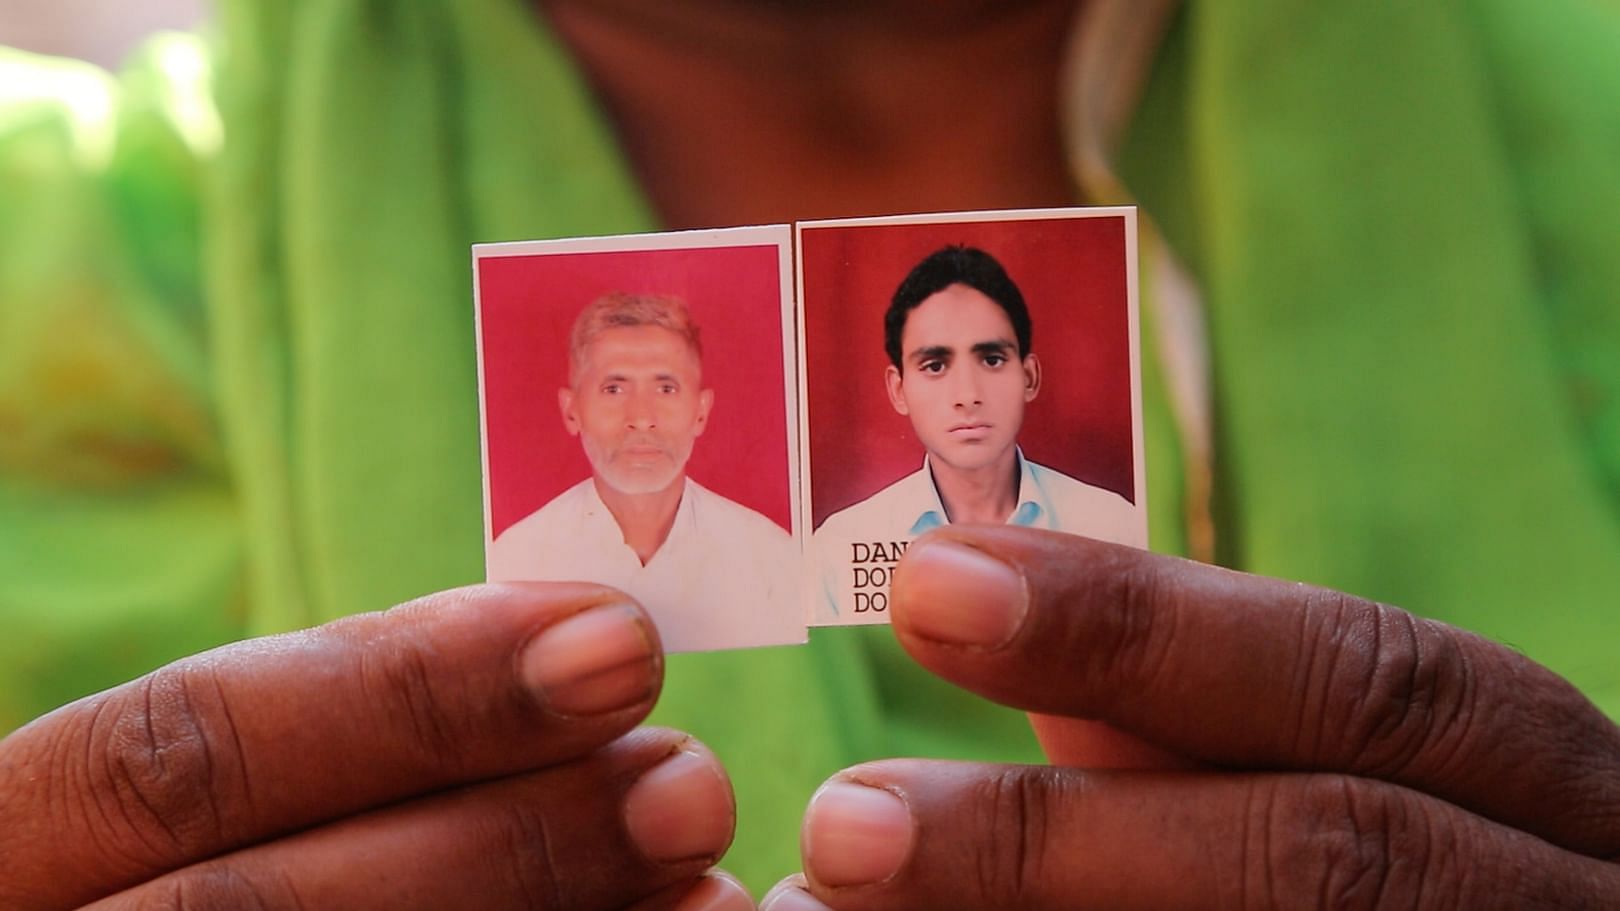 While Akhlaq died, his son Danish (on the right) suffered serious injuries after being brutally assaulted by the mob.